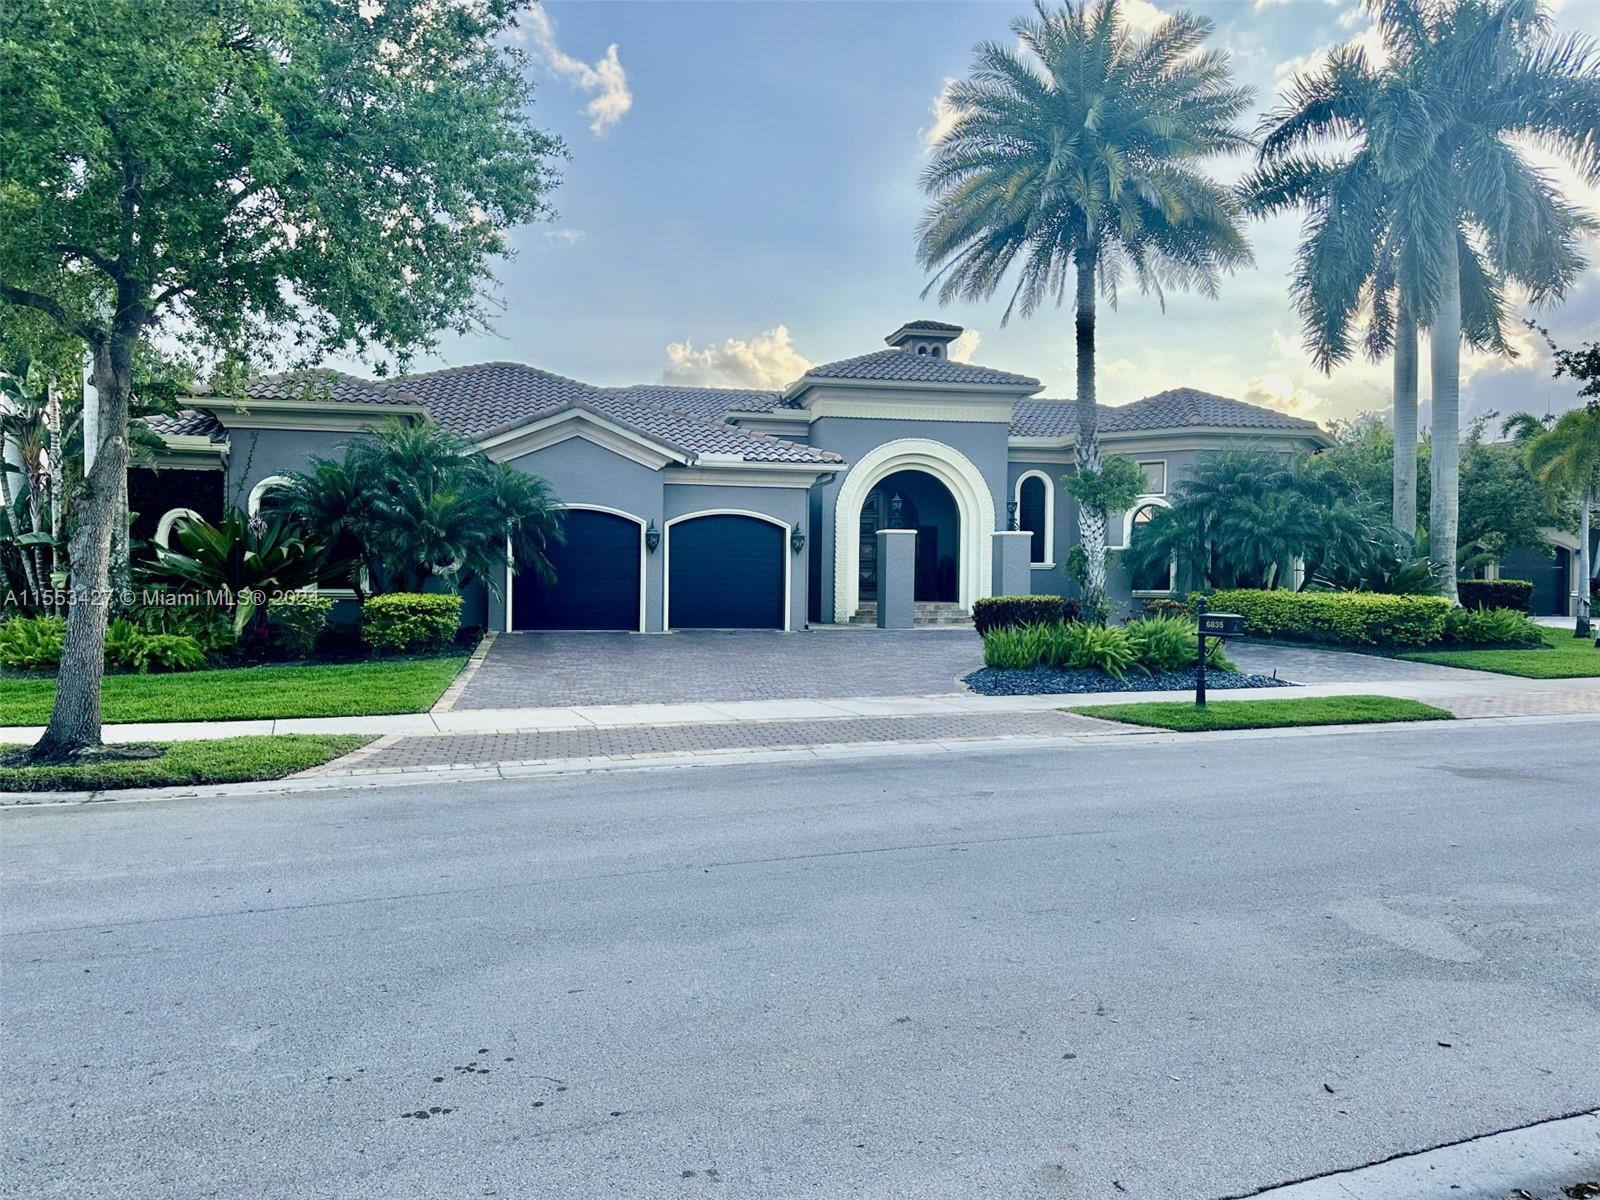 Photo of 6835 NW 122nd Ave in Parkland, FL